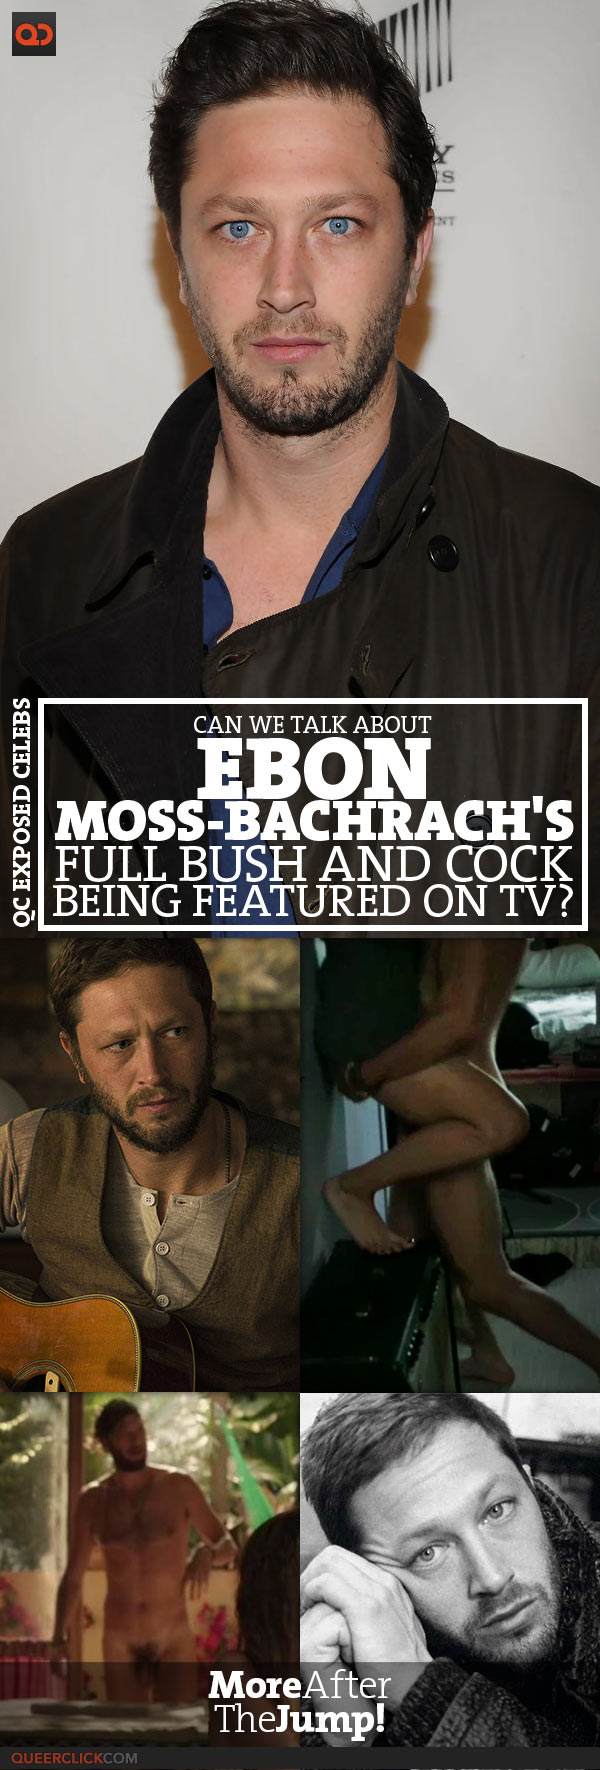 Can We Talk About Ebon Moss-bachrach's Full Bush And Cock Being Featured On TV?